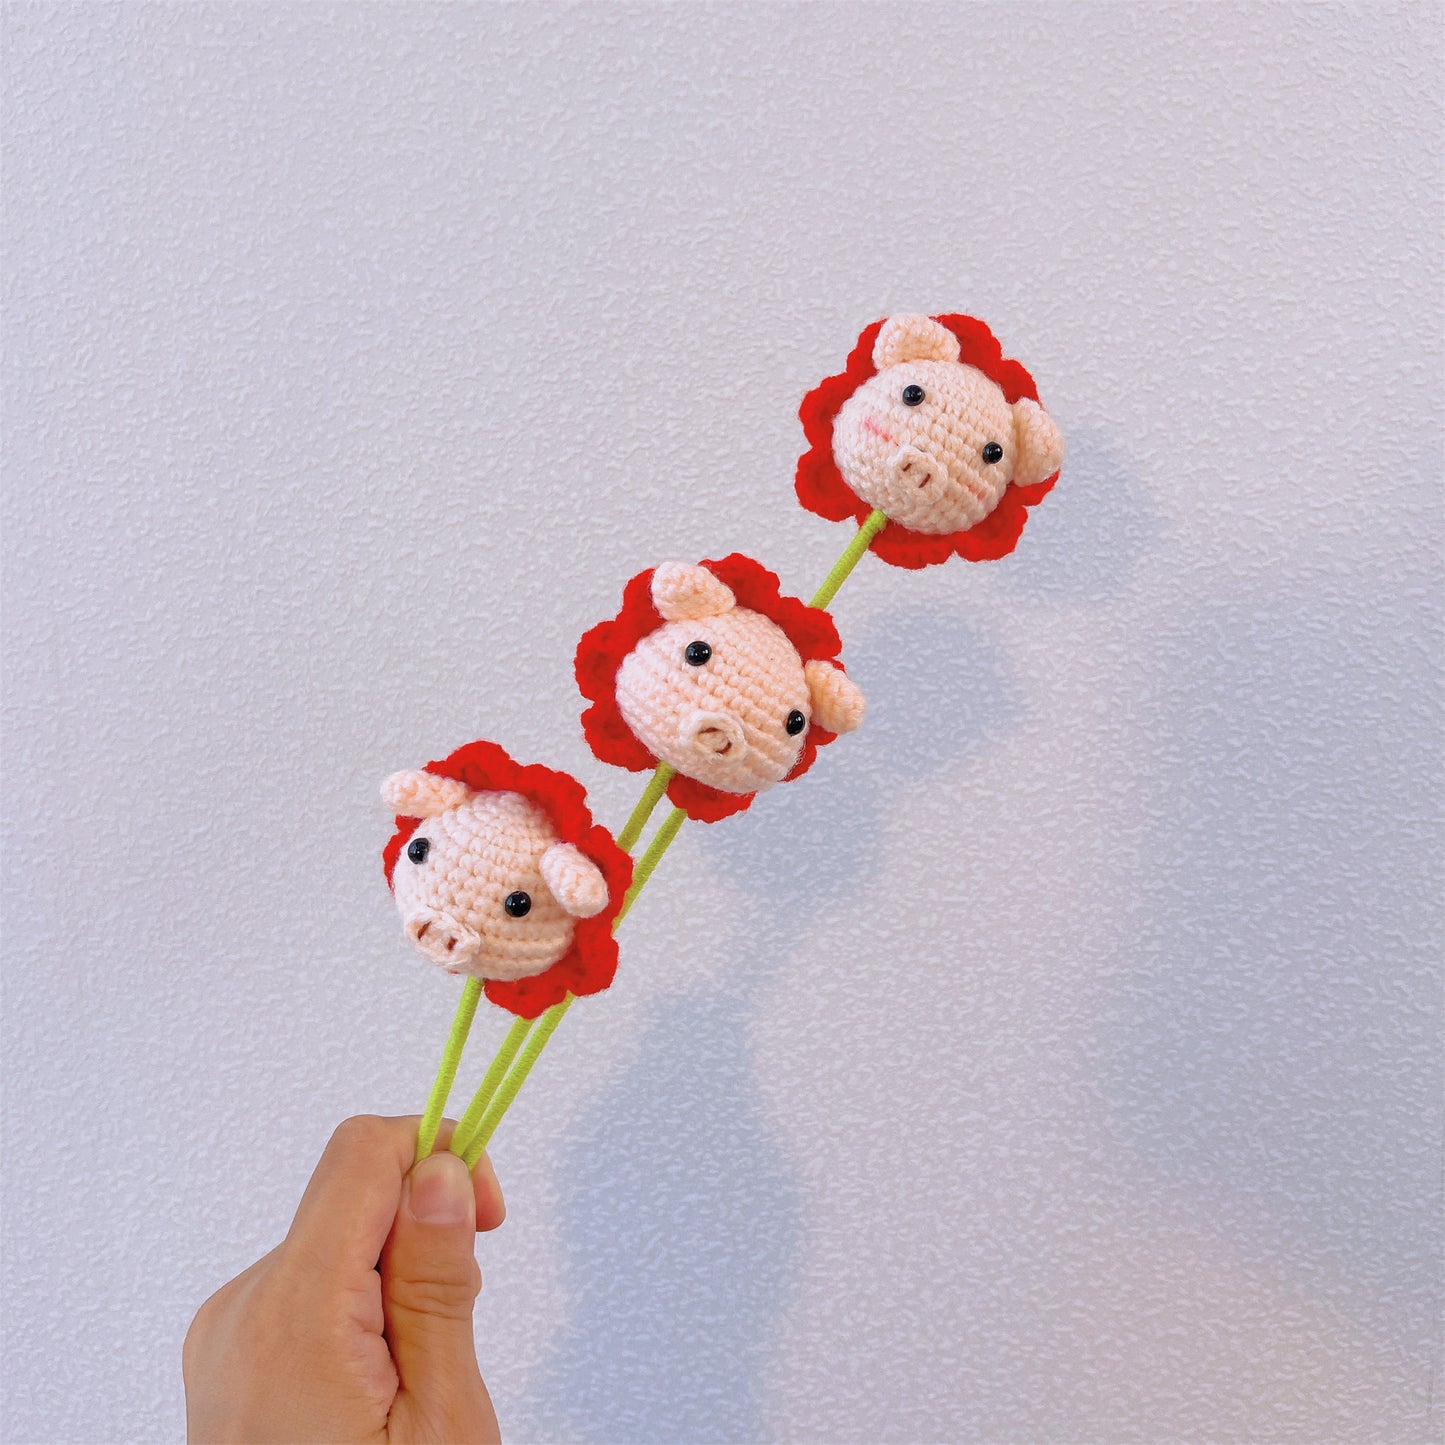 Piggy Bloom: Handcrafted Crochet Cute Pig Head with Flower-Shaped Finish for a Playful Garden Decor